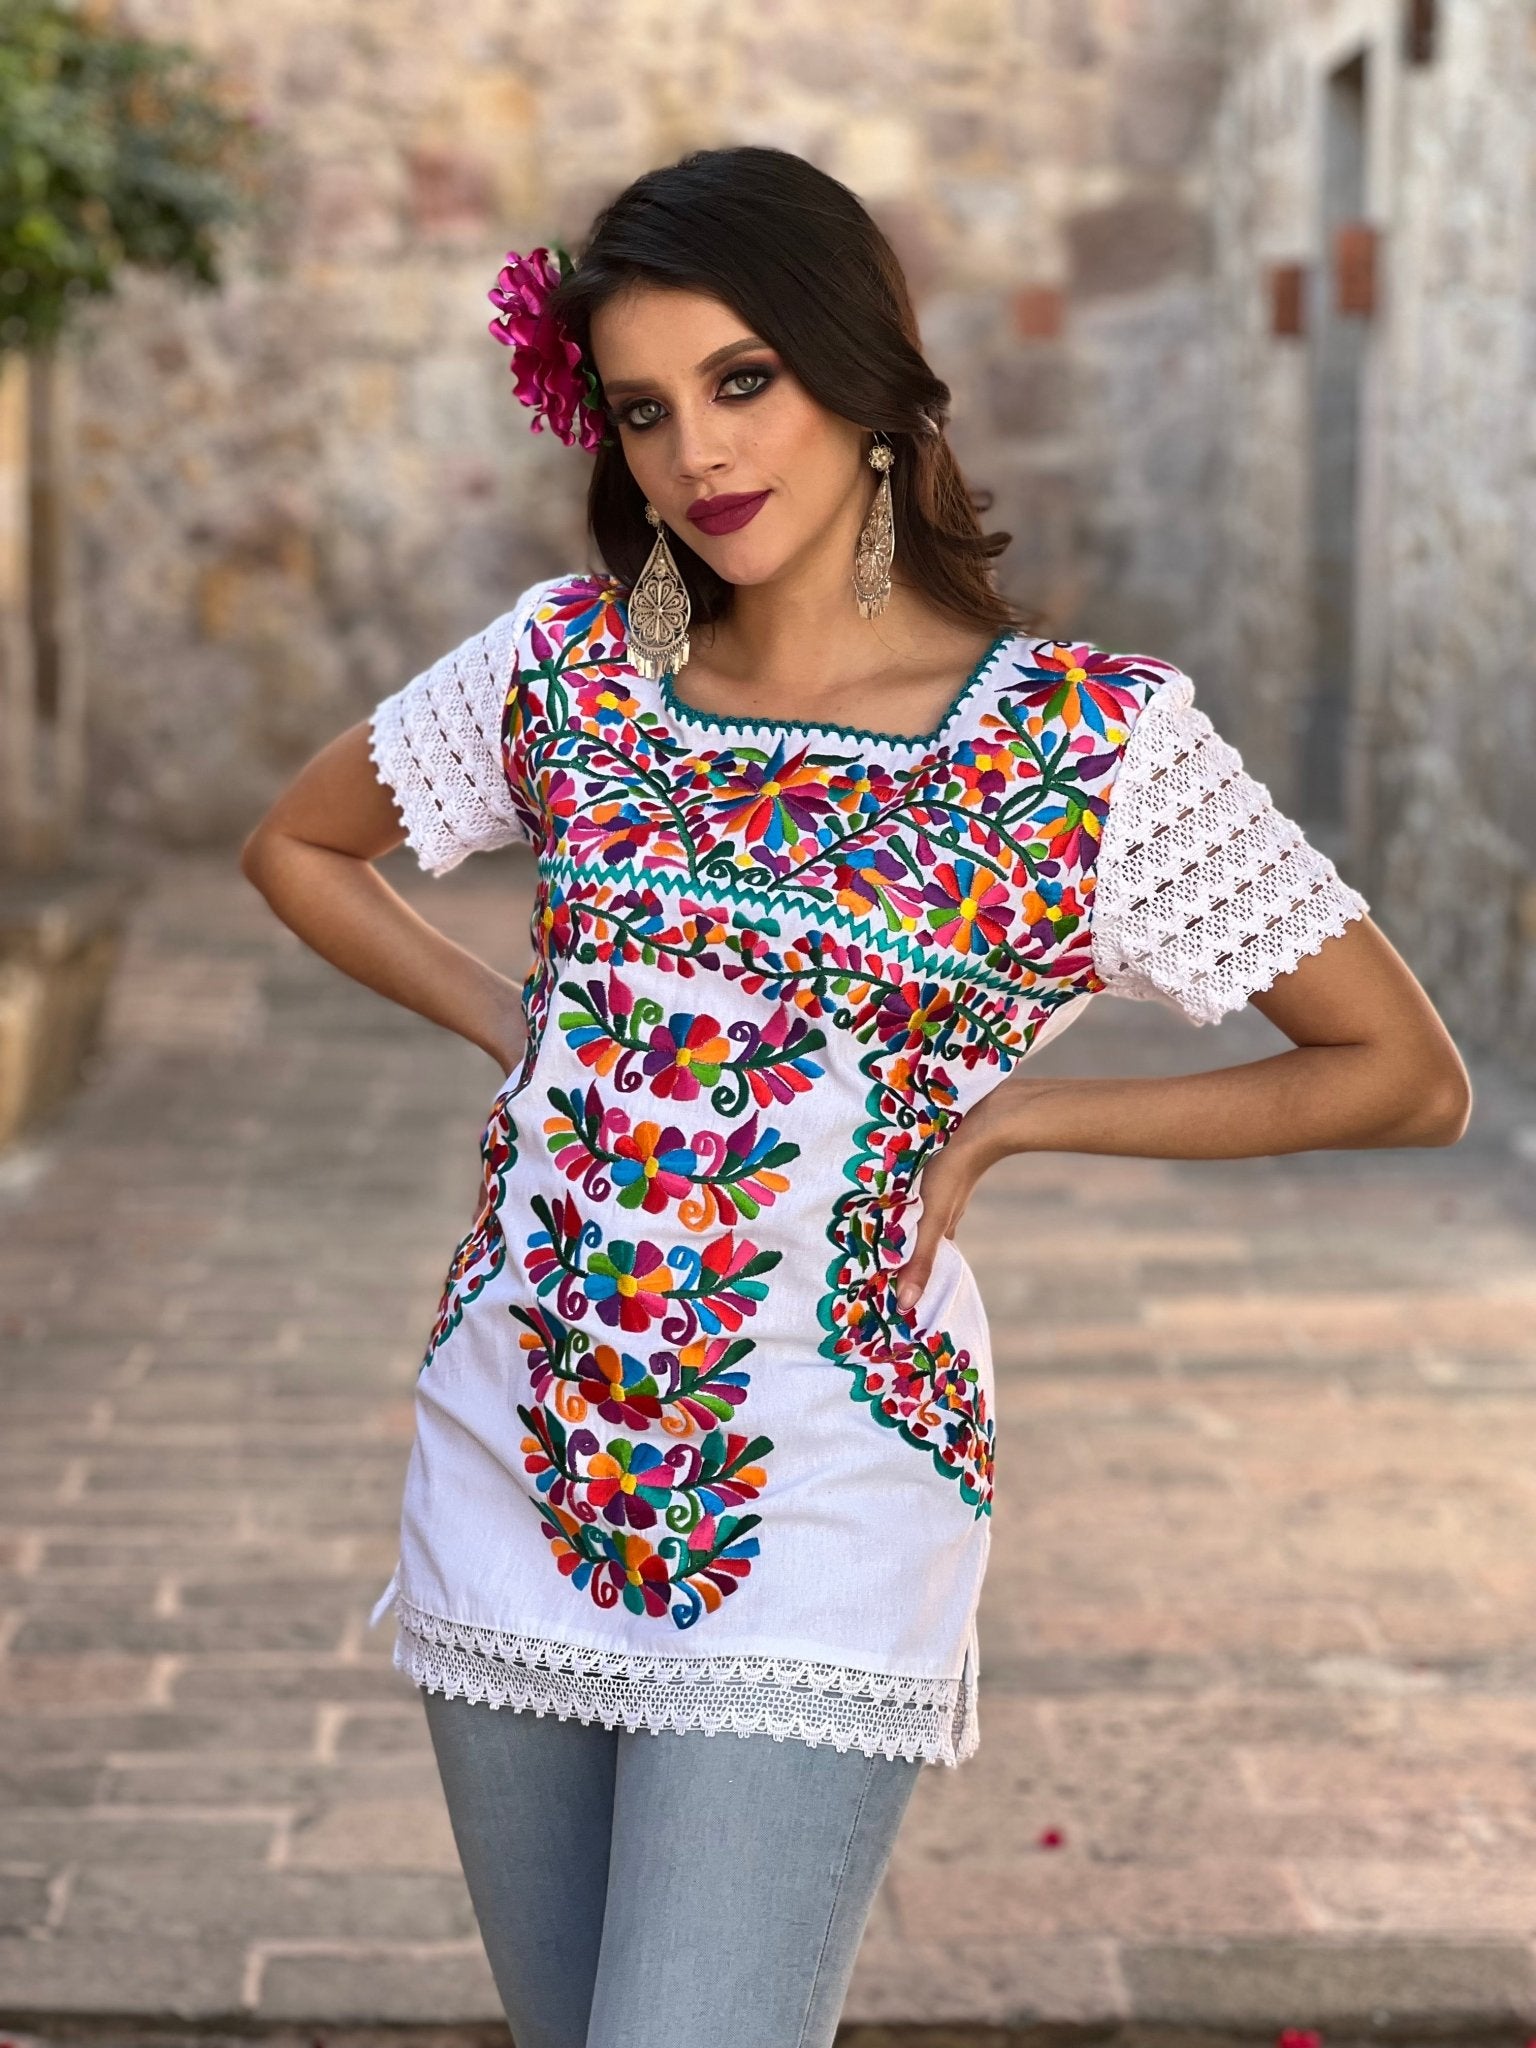 Mexican Artisanal Floral Embroidered Blouse. Blusa Otomi Floral. - Solei Store